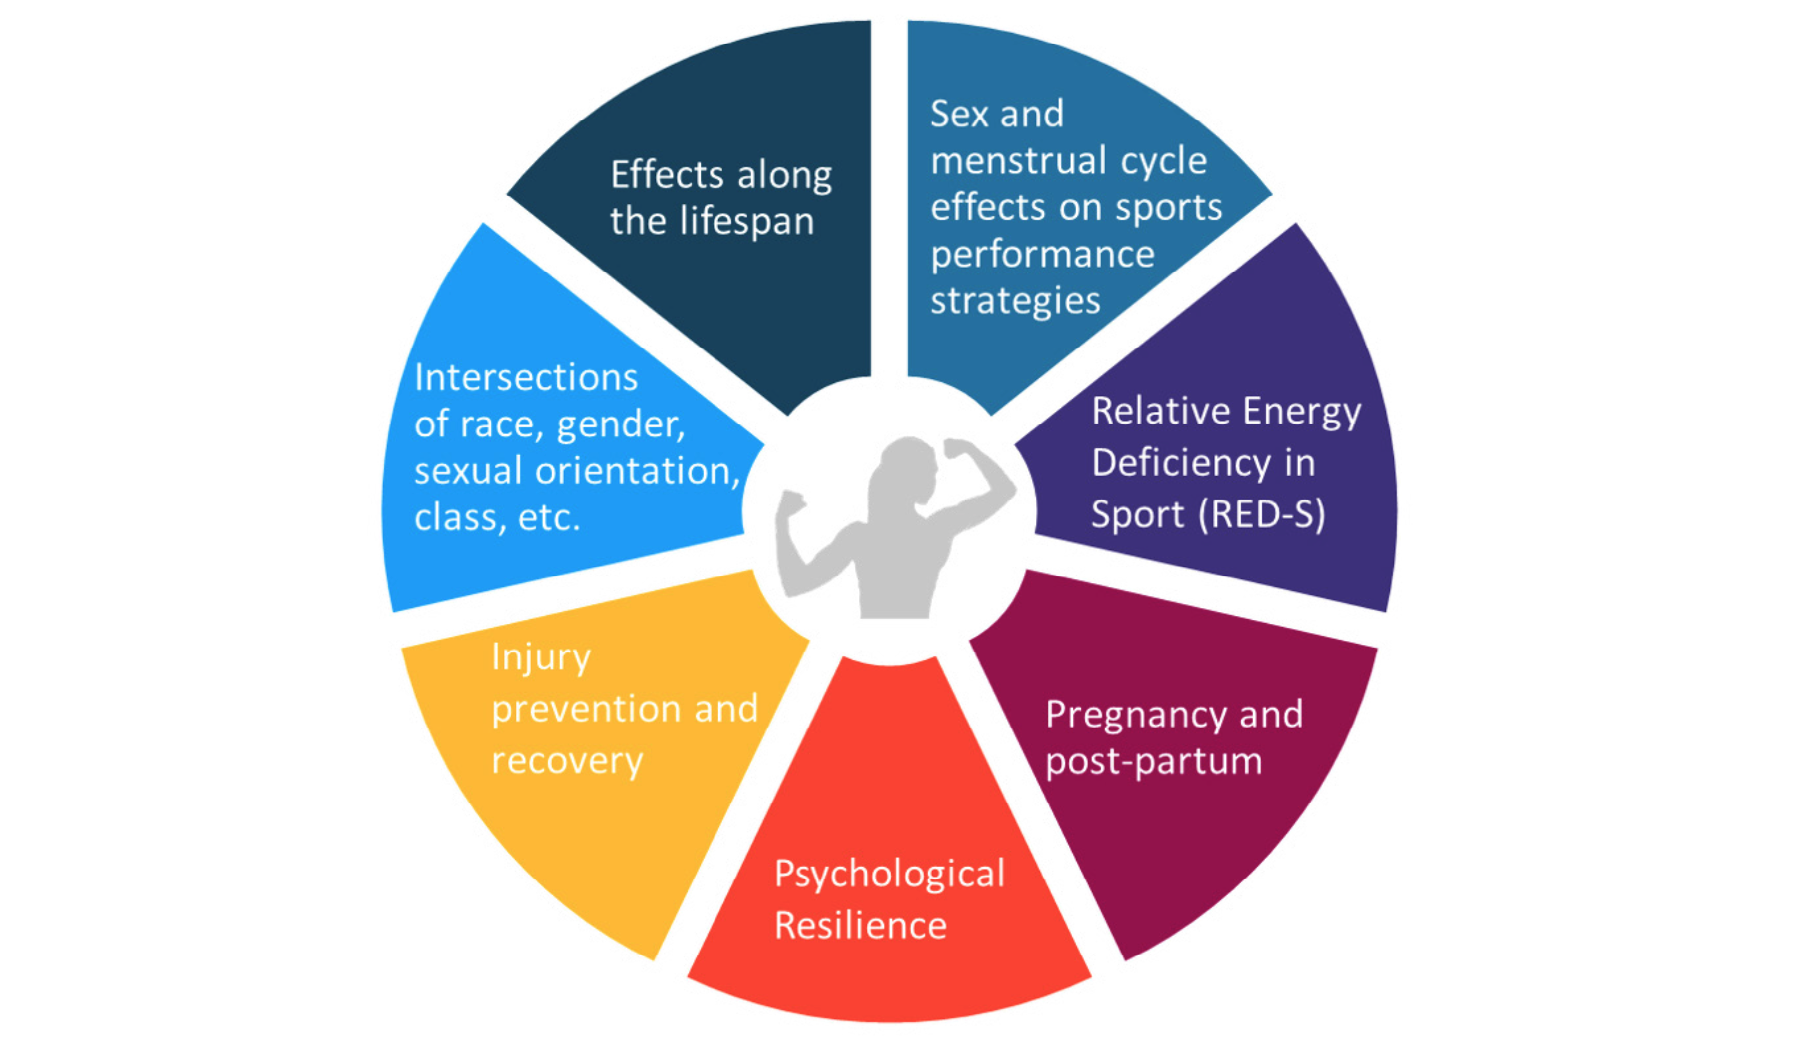 Female Athlete Program areas of research, clinical care, education, and advocacy